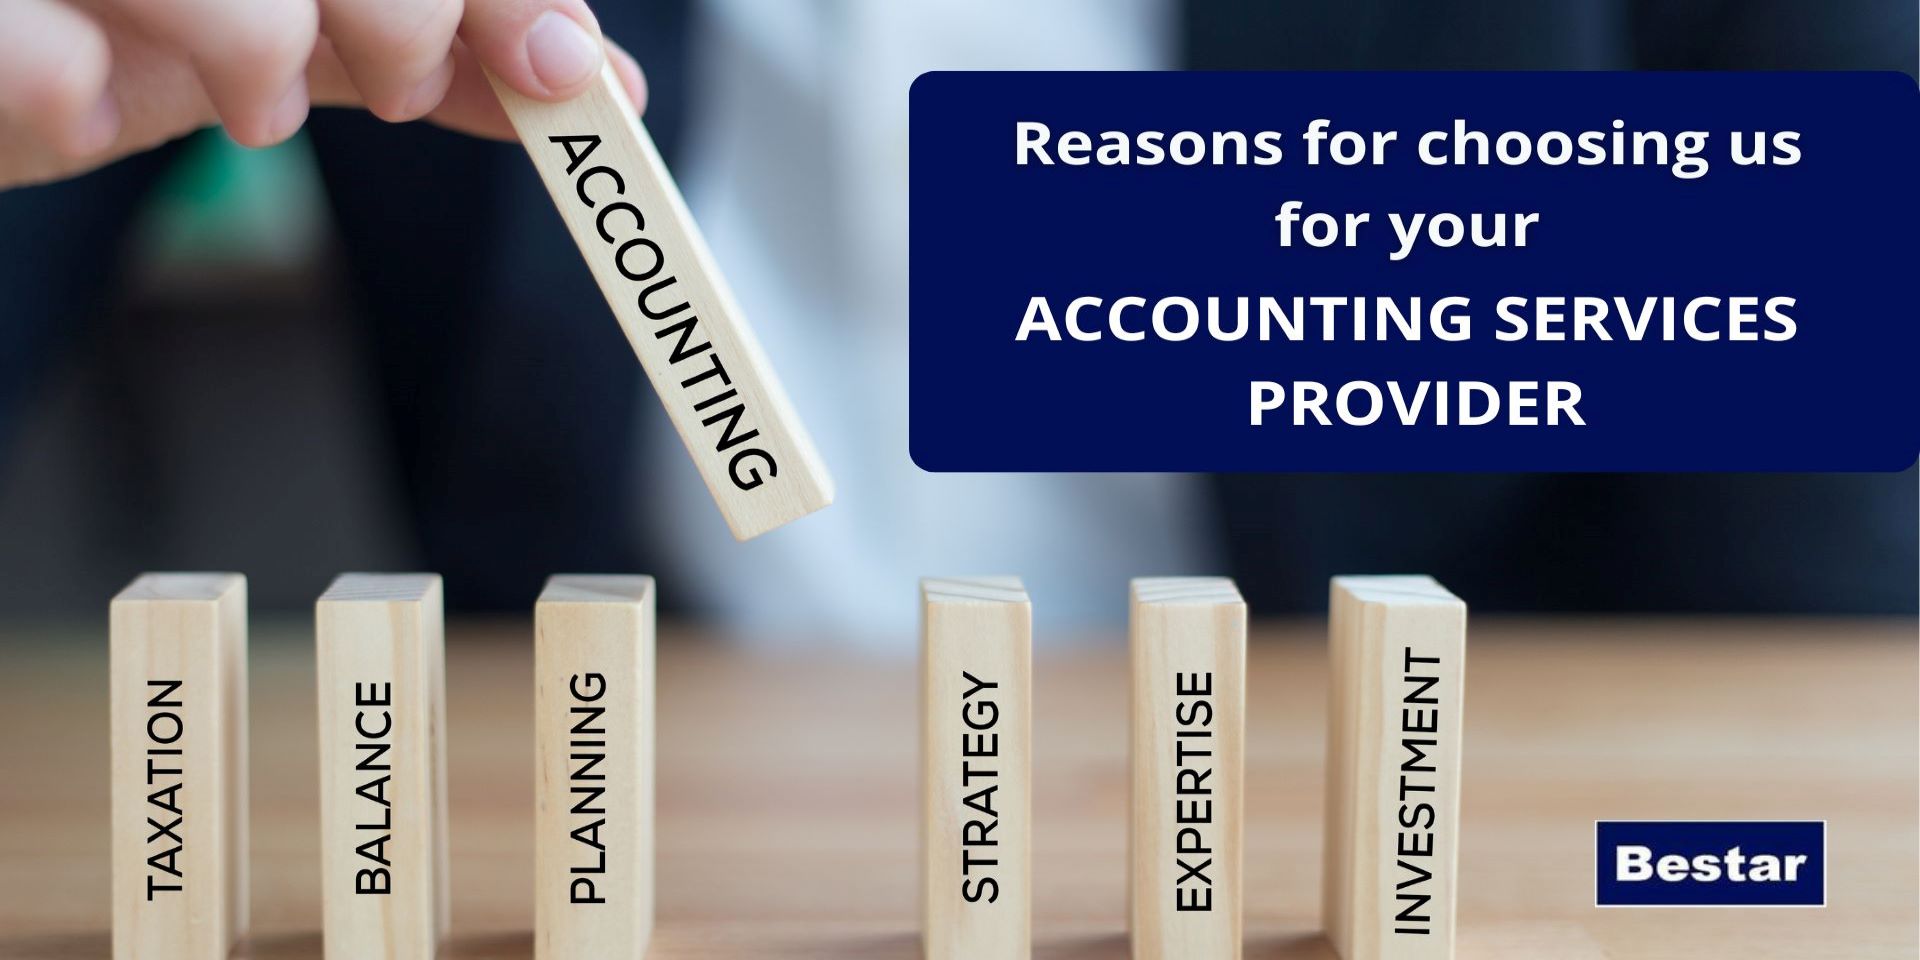 Reasons for choosing us for your Accounting Services Provider